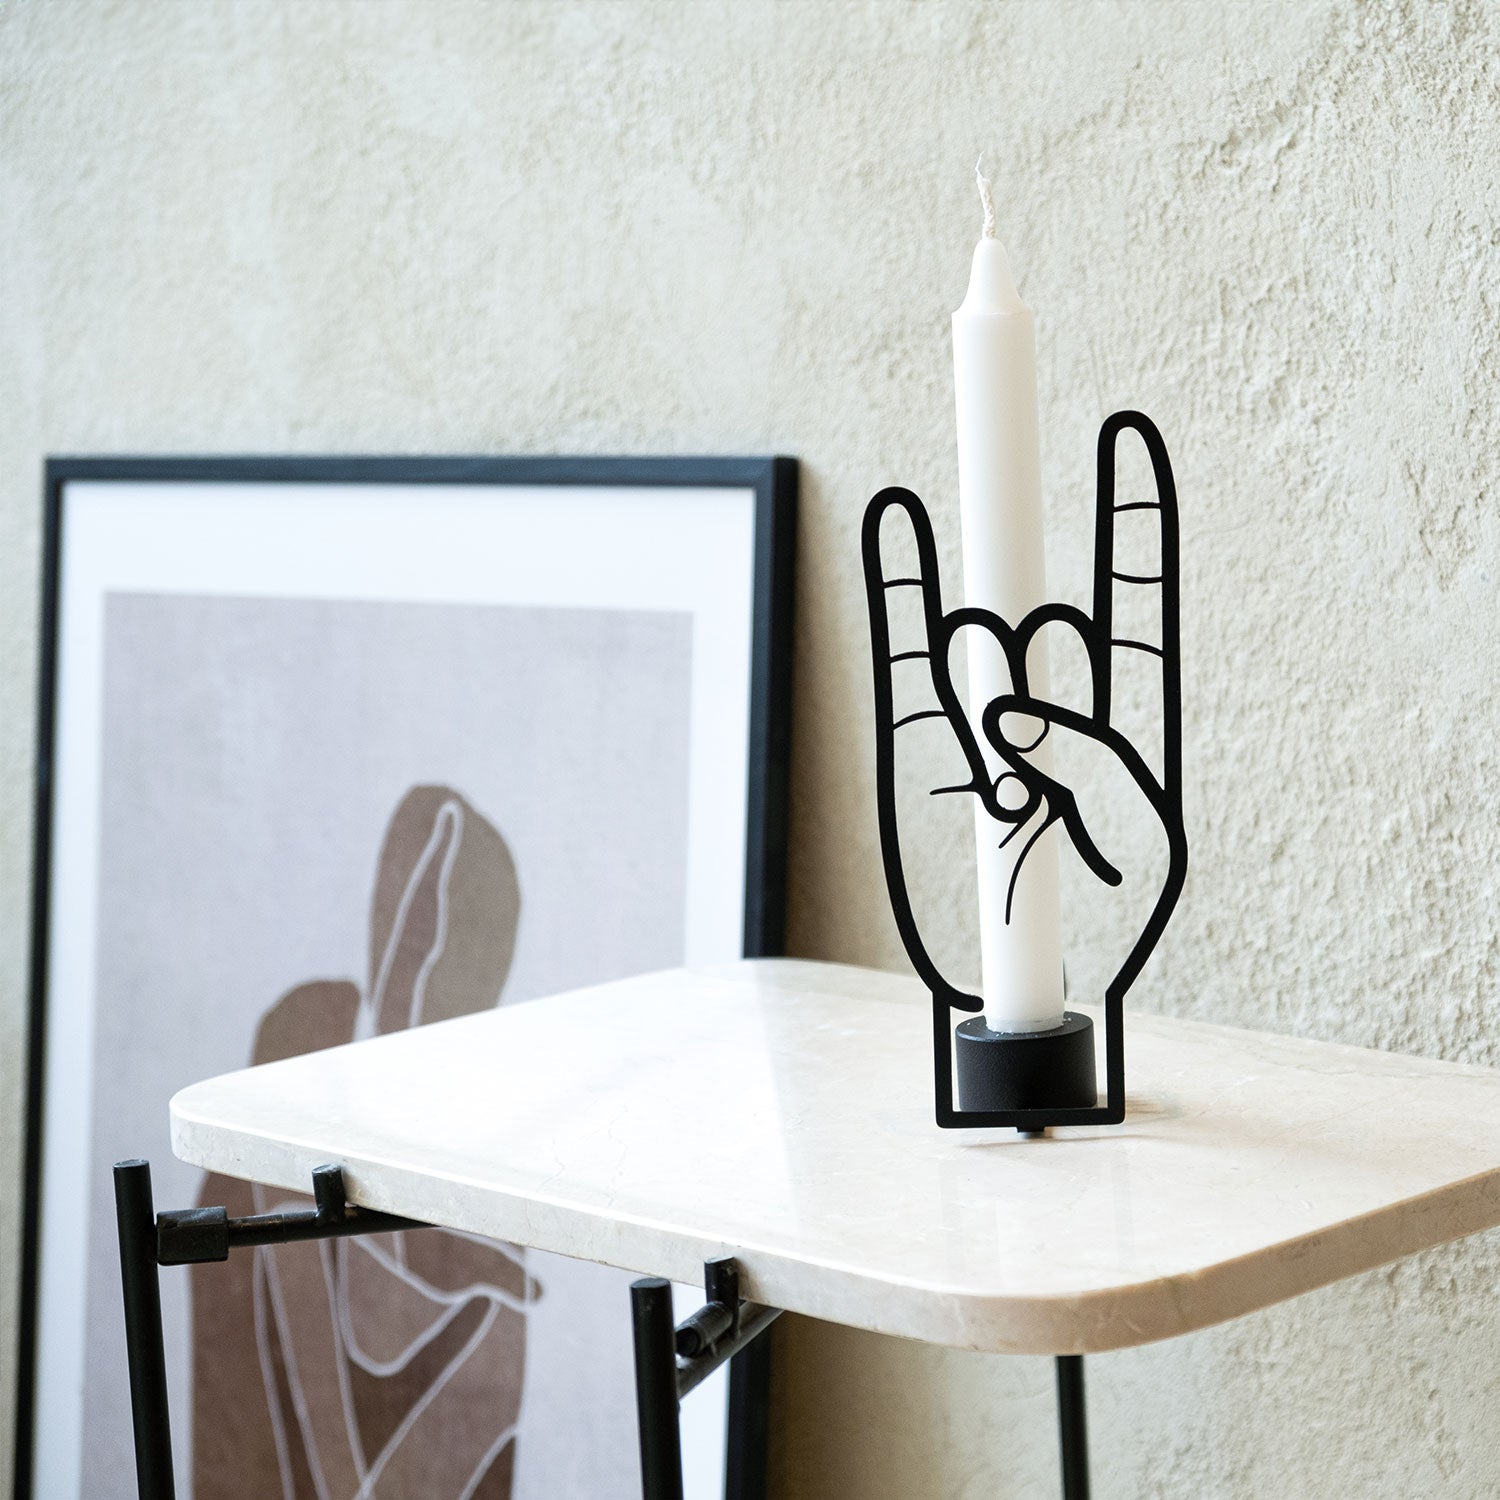 CandleHand Candle Holder - You Rock